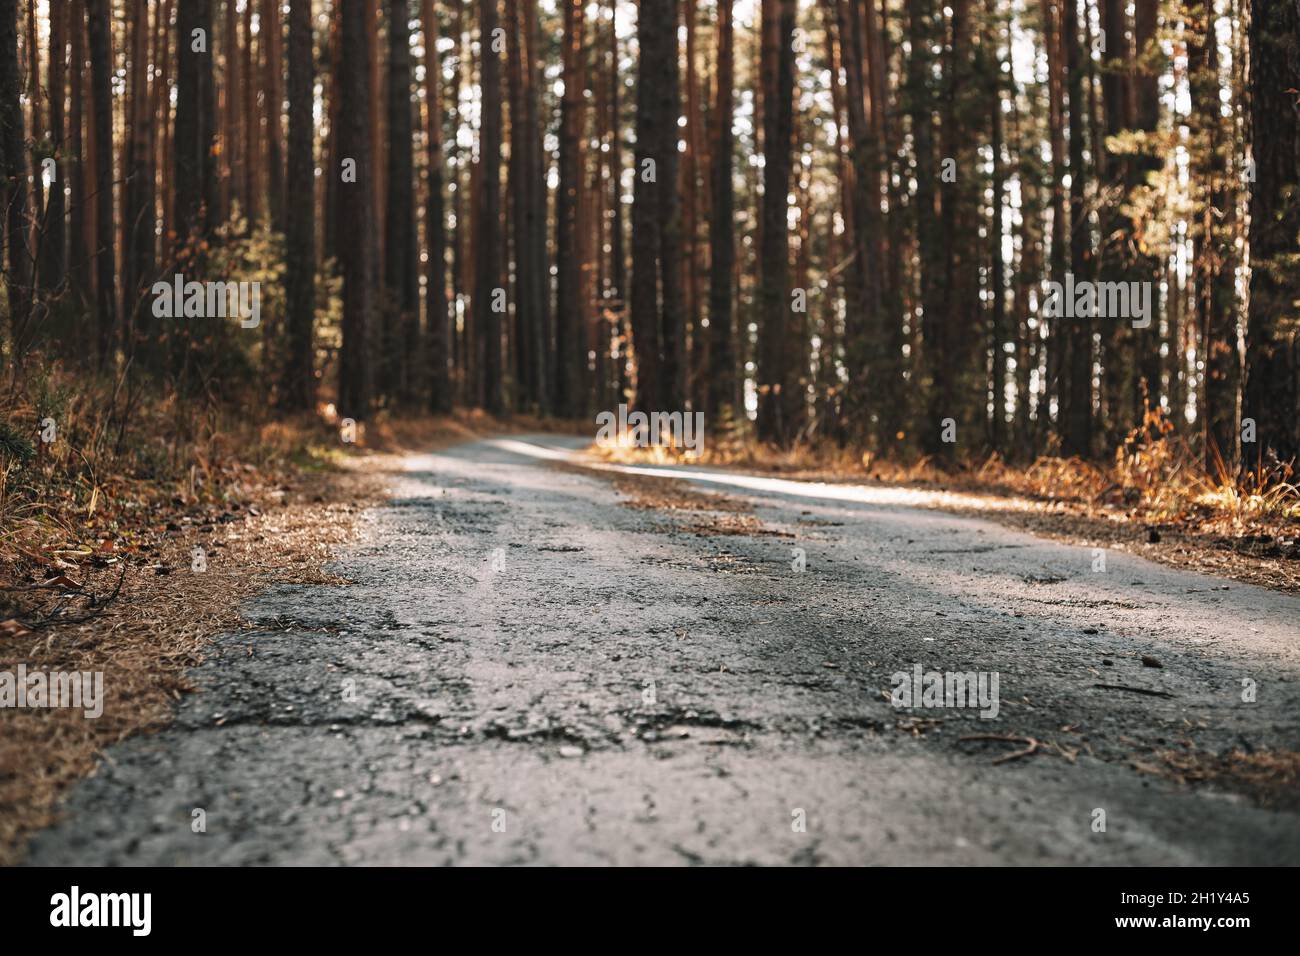 Old abandoned asphalt road in the autumn pine forest. Mystery autumn forest landscape. Beauty in nature. Selective focus Stock Photo